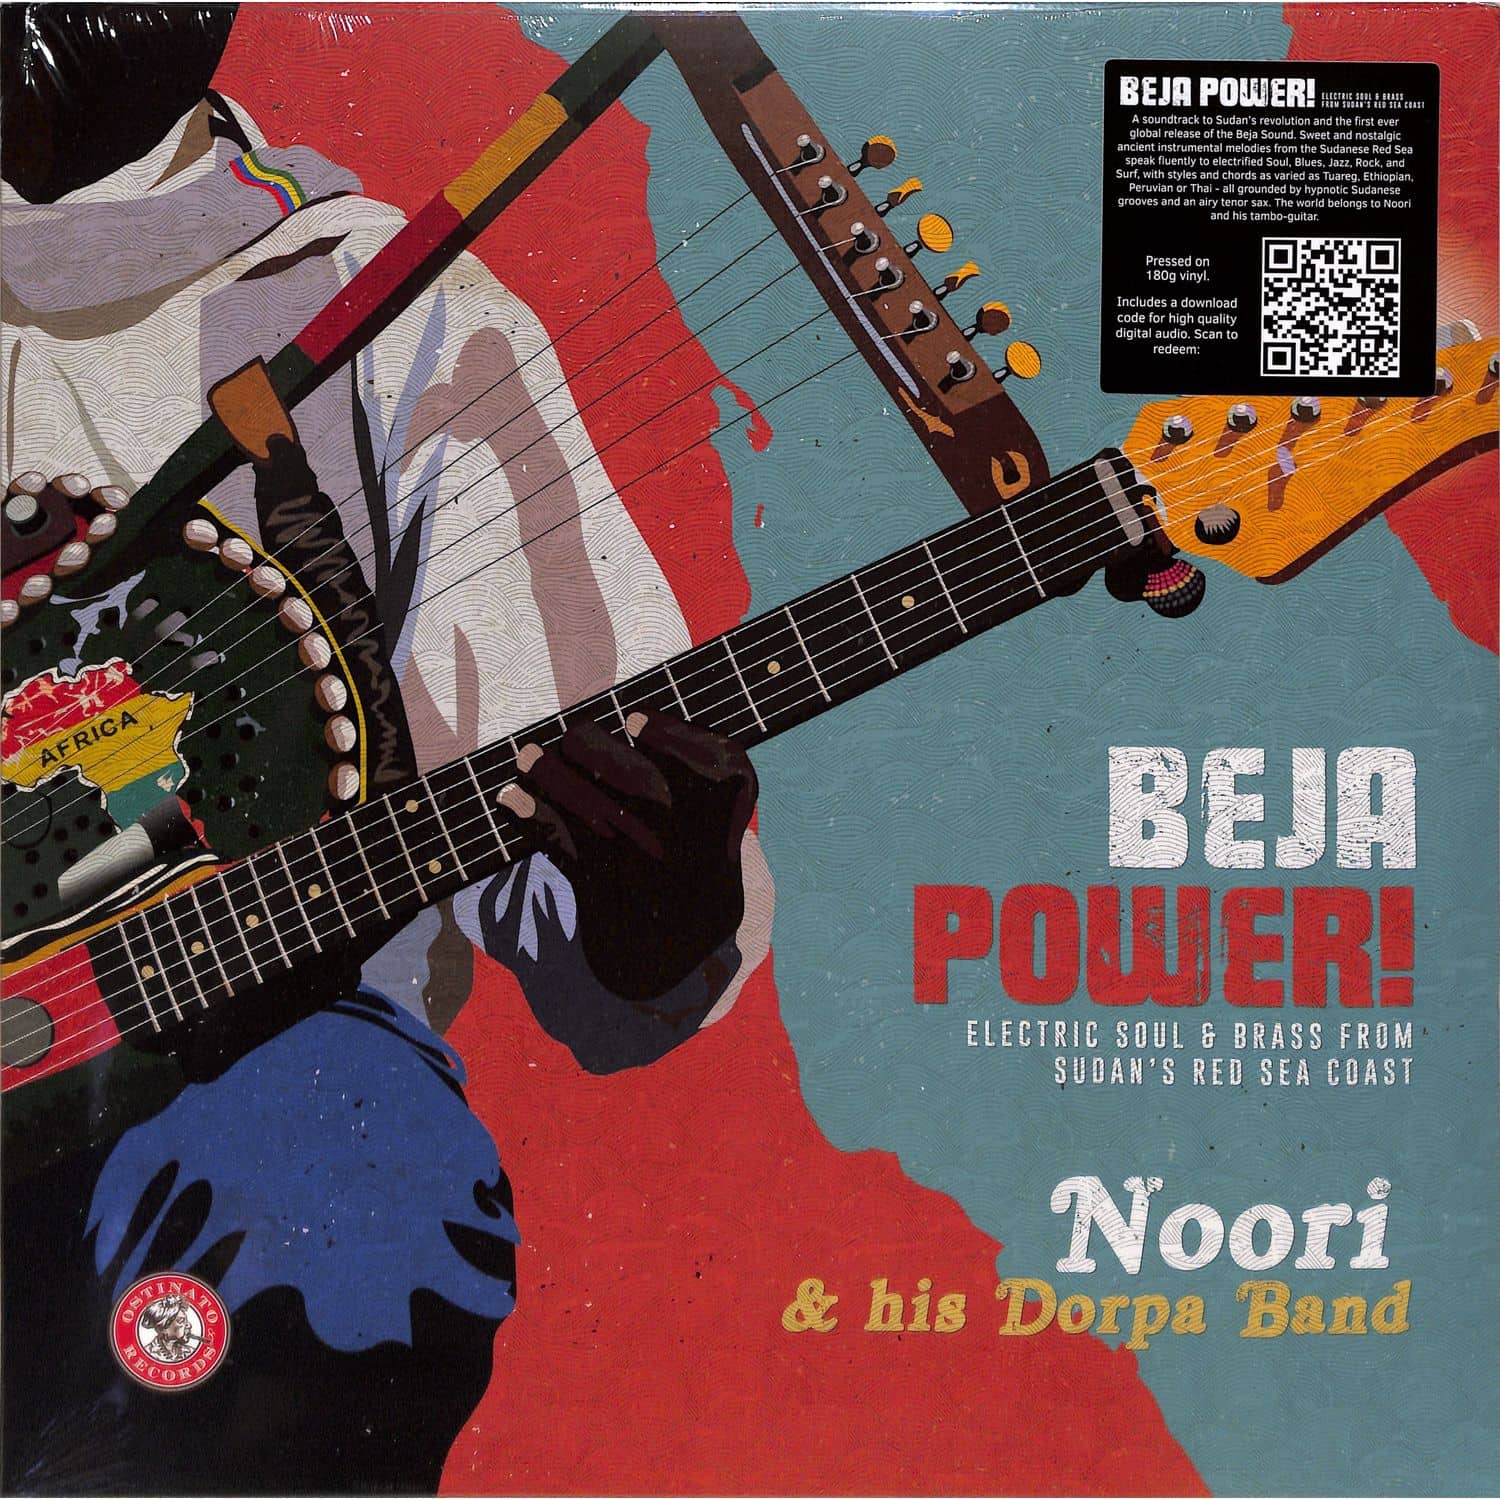 Noori & His Dorpa Band - BEJA POWER! ELECTRIC SOUL & BRASS FROM SUDAN 